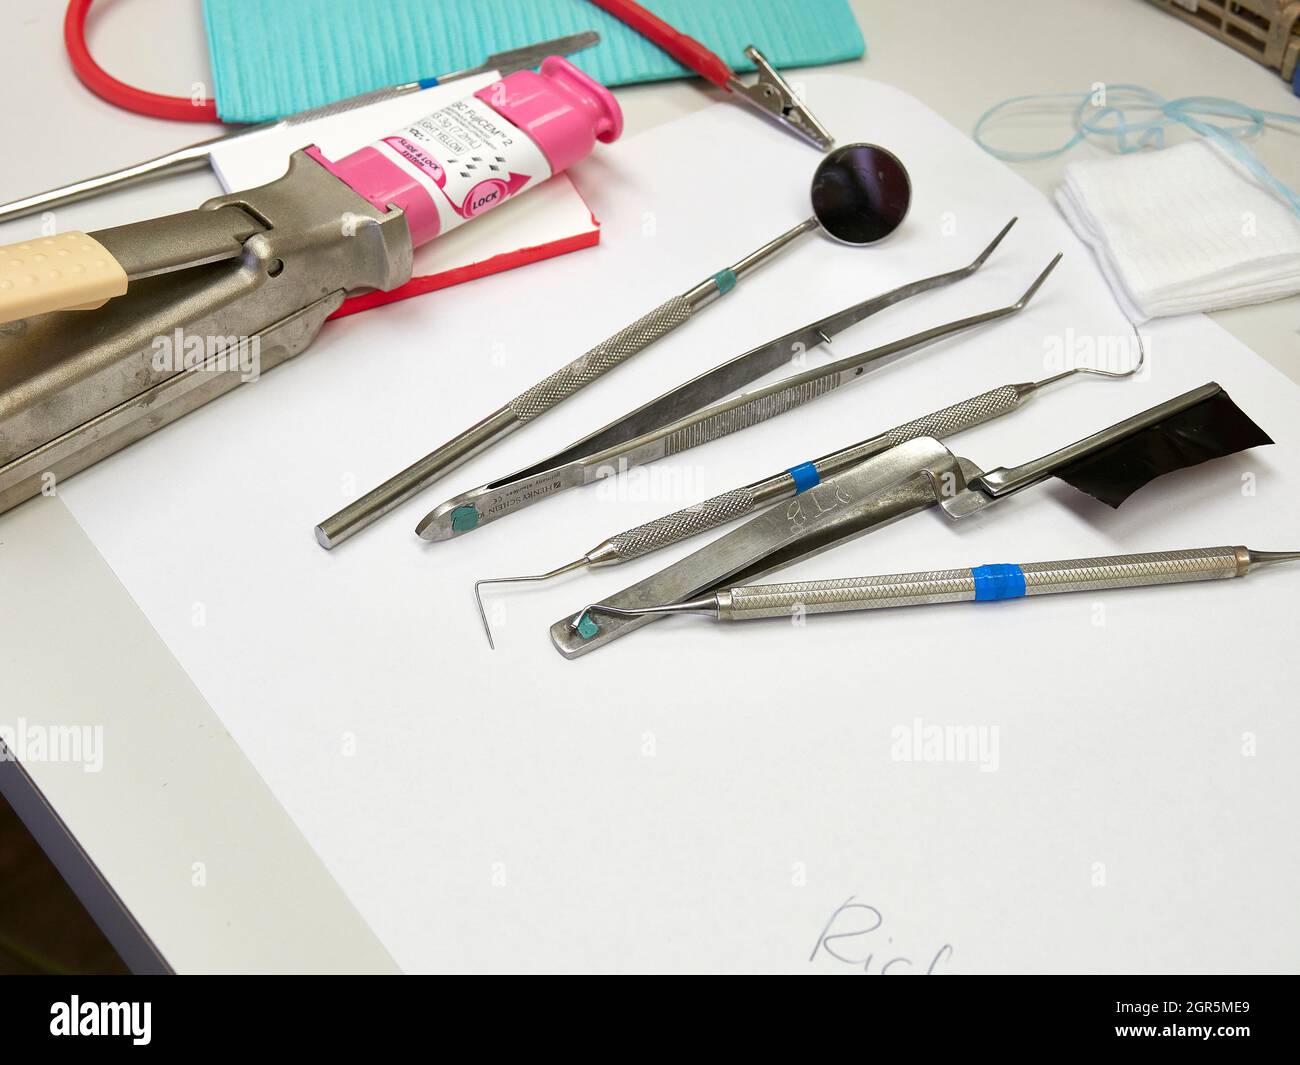 Dental tools on a tray in an exam room of a dentist office. Stock Photo